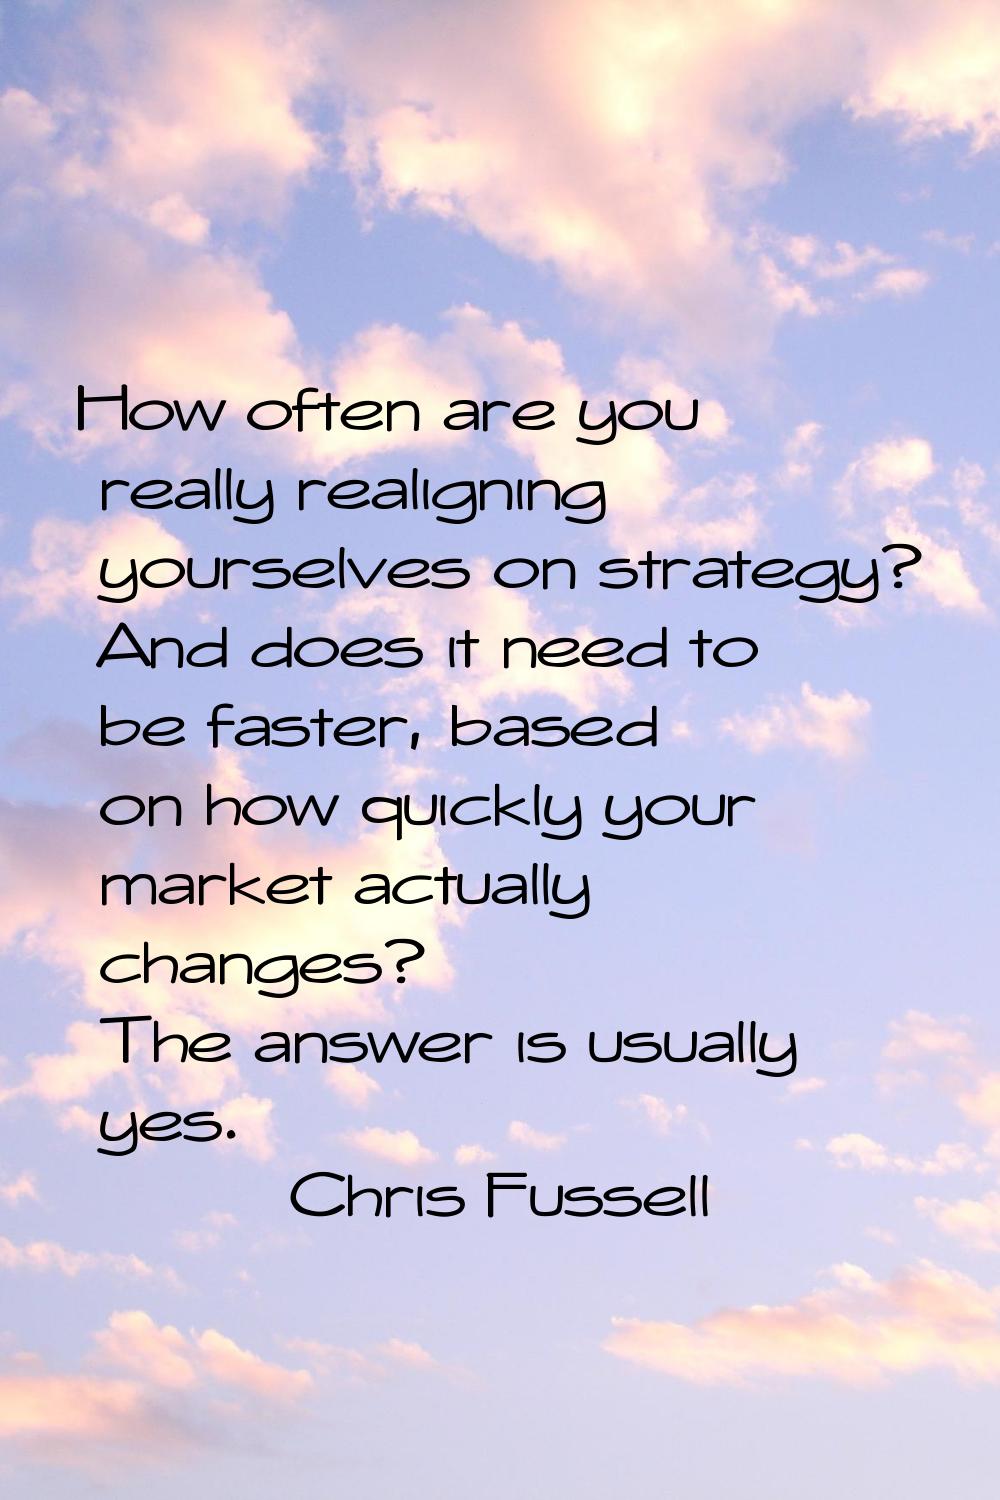 How often are you really realigning yourselves on strategy? And does it need to be faster, based on